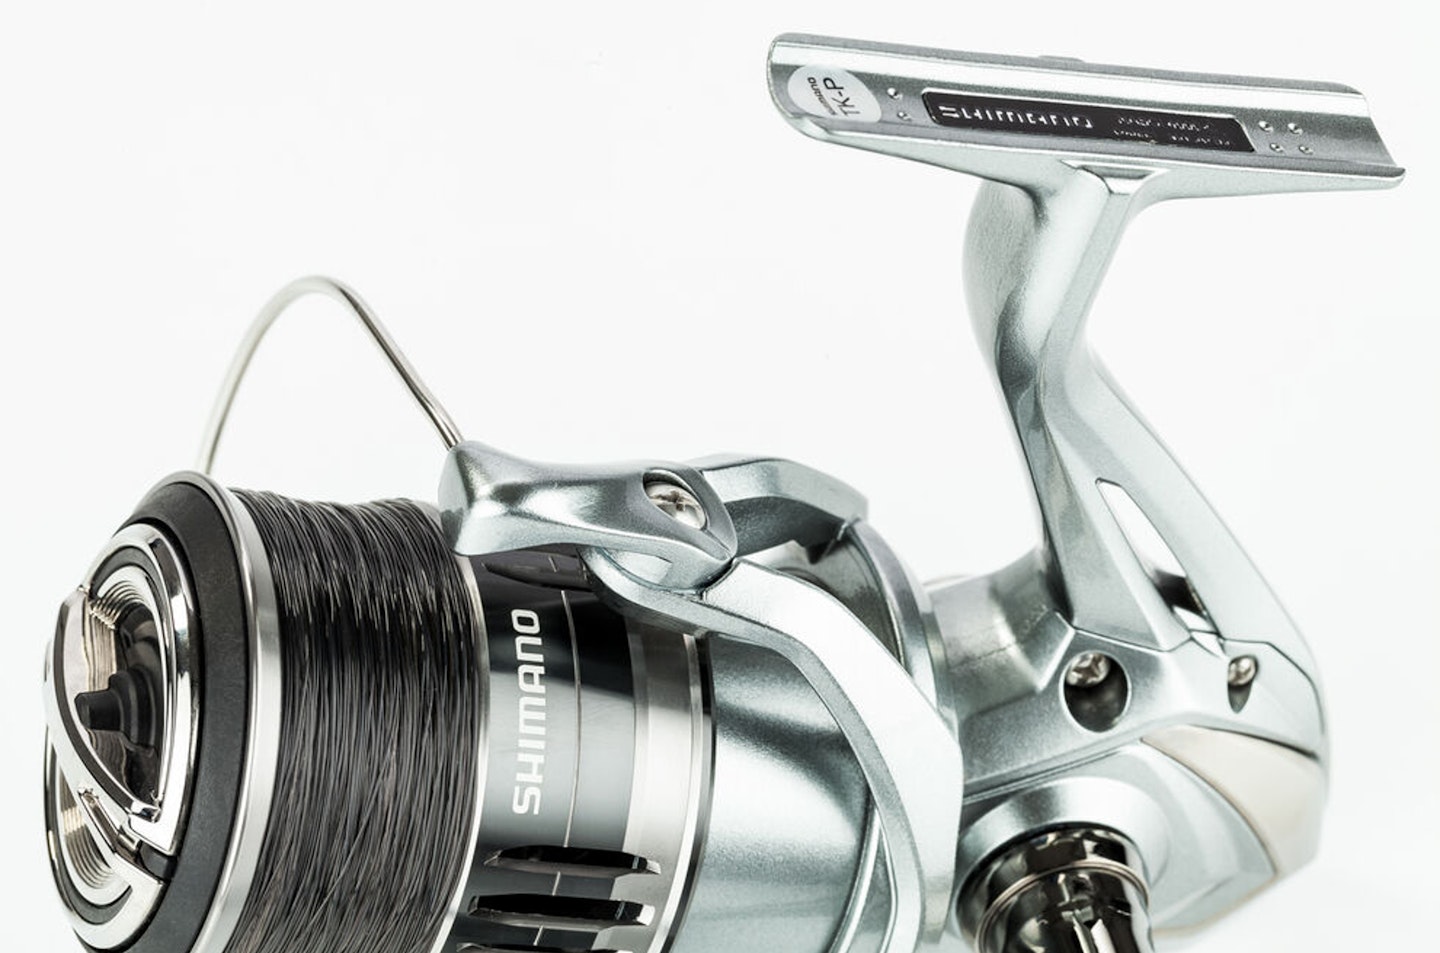 Best Fishing Reel I Have Ever Used - Shimano Stradic 2500